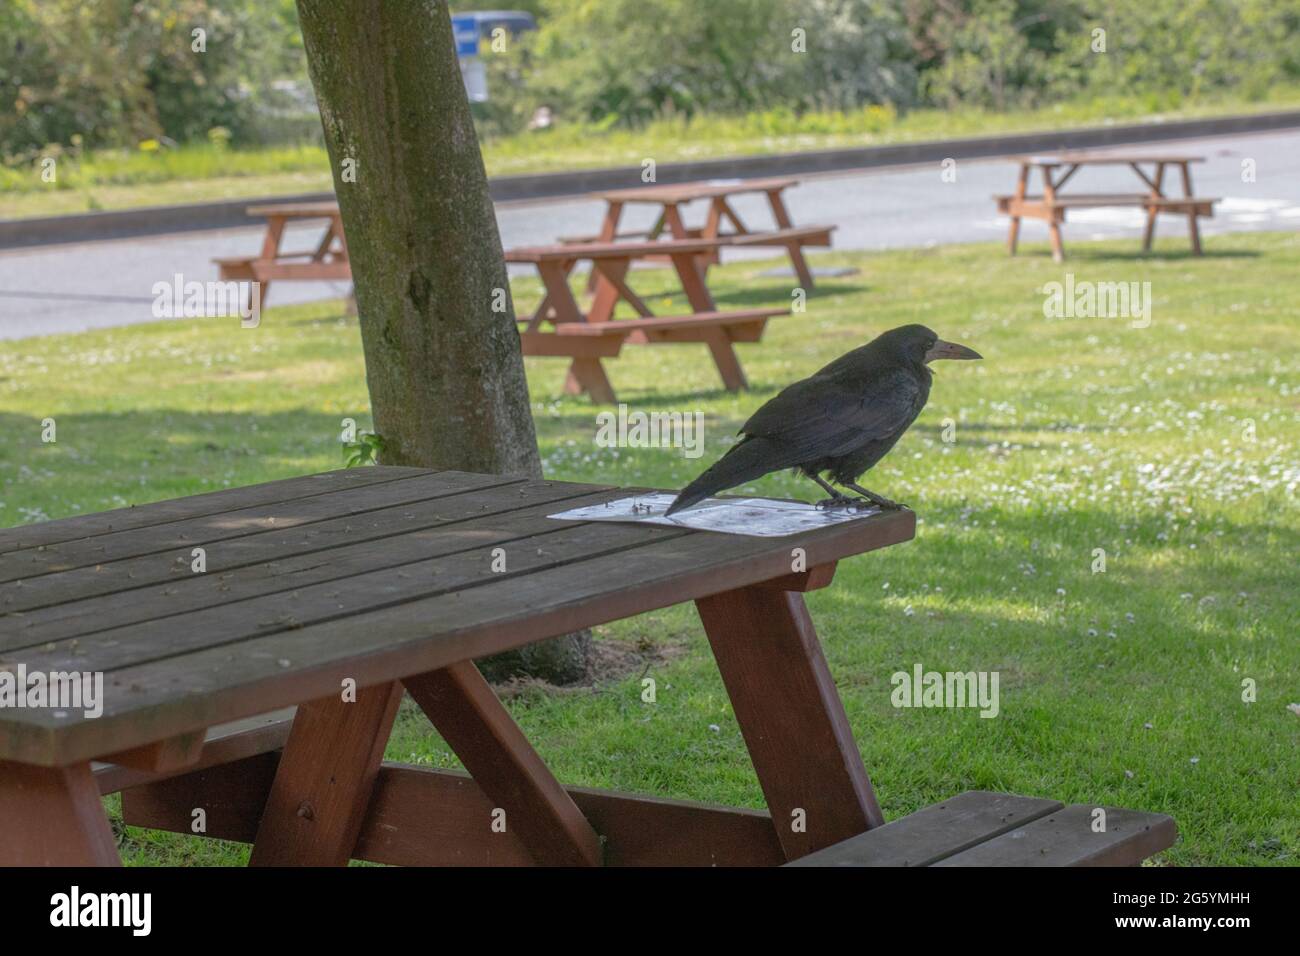 Rook (Corvus fragilegus). Adult bird standing on a picnic table at a motorway service station waiting patiently for visitors to arrive  and spill food Stock Photo